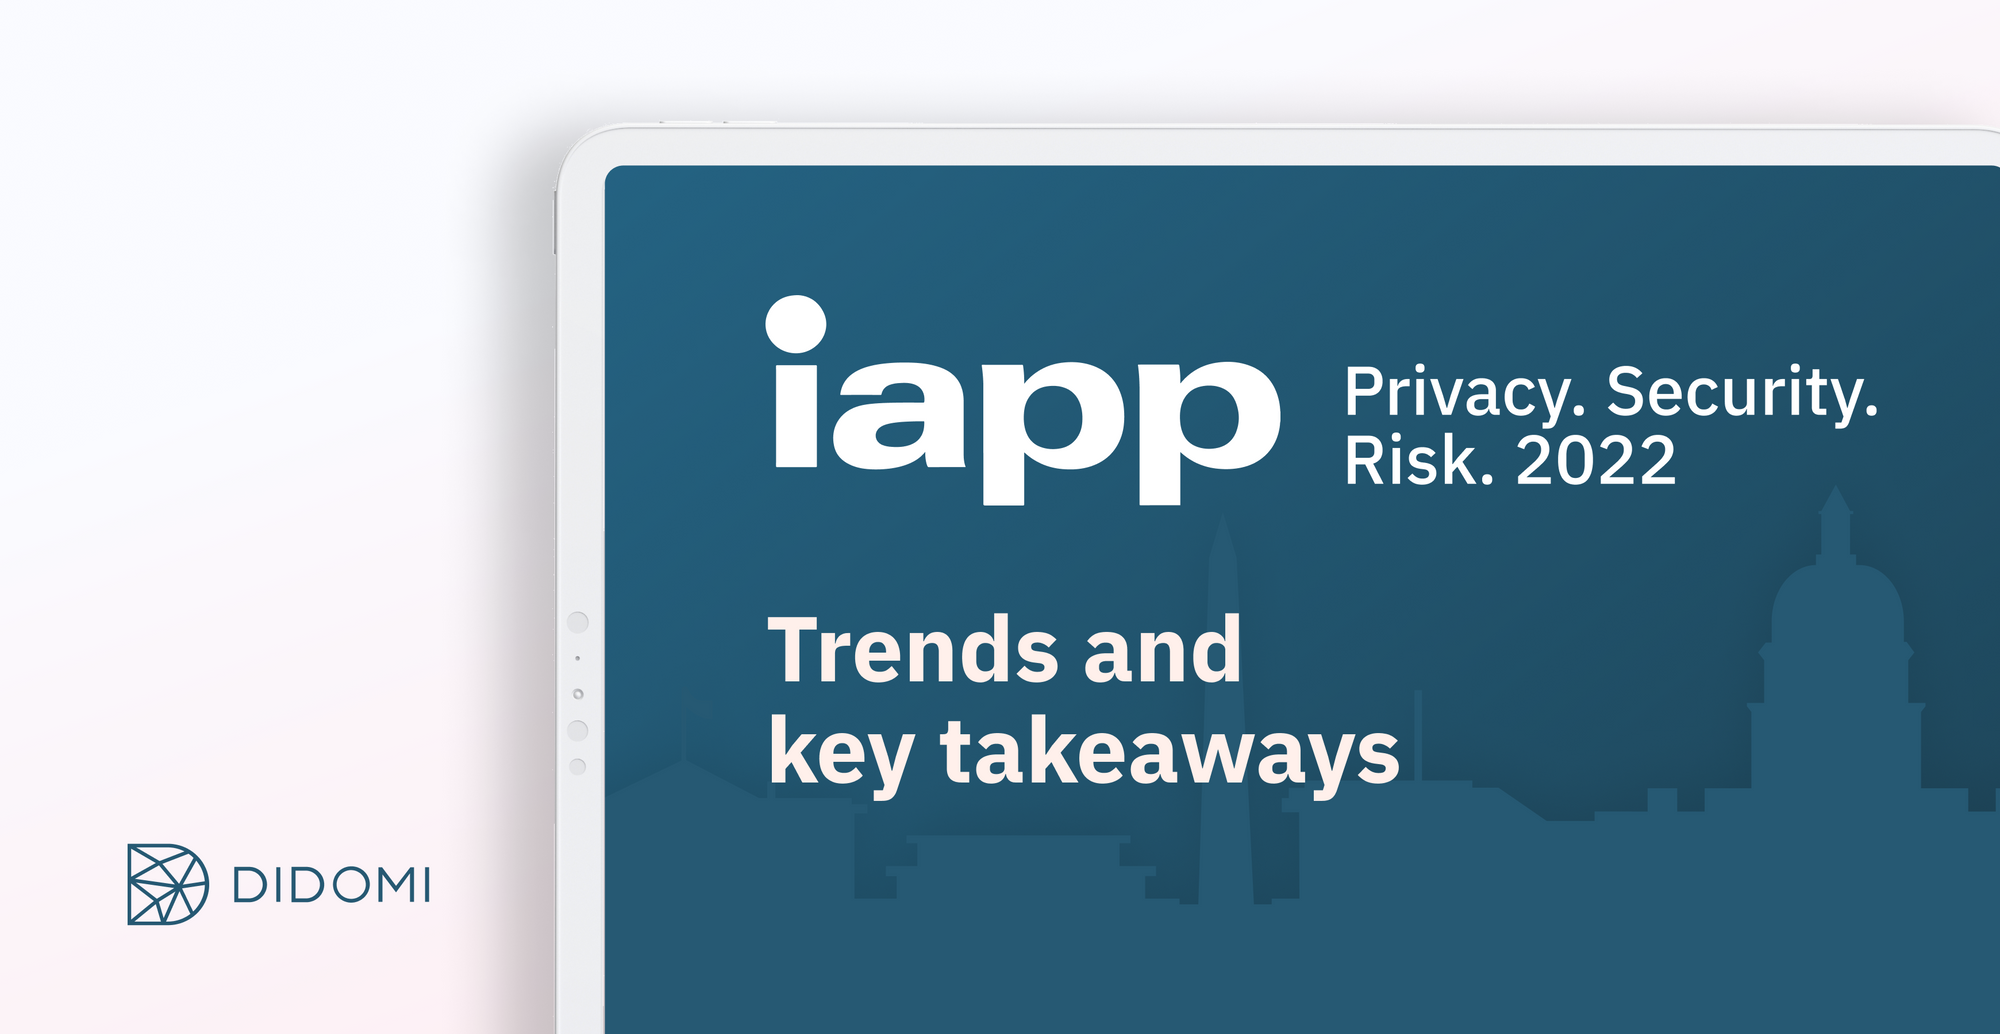 Takeaways from the IAPP Privacy. Security. Risk. 2022 conference